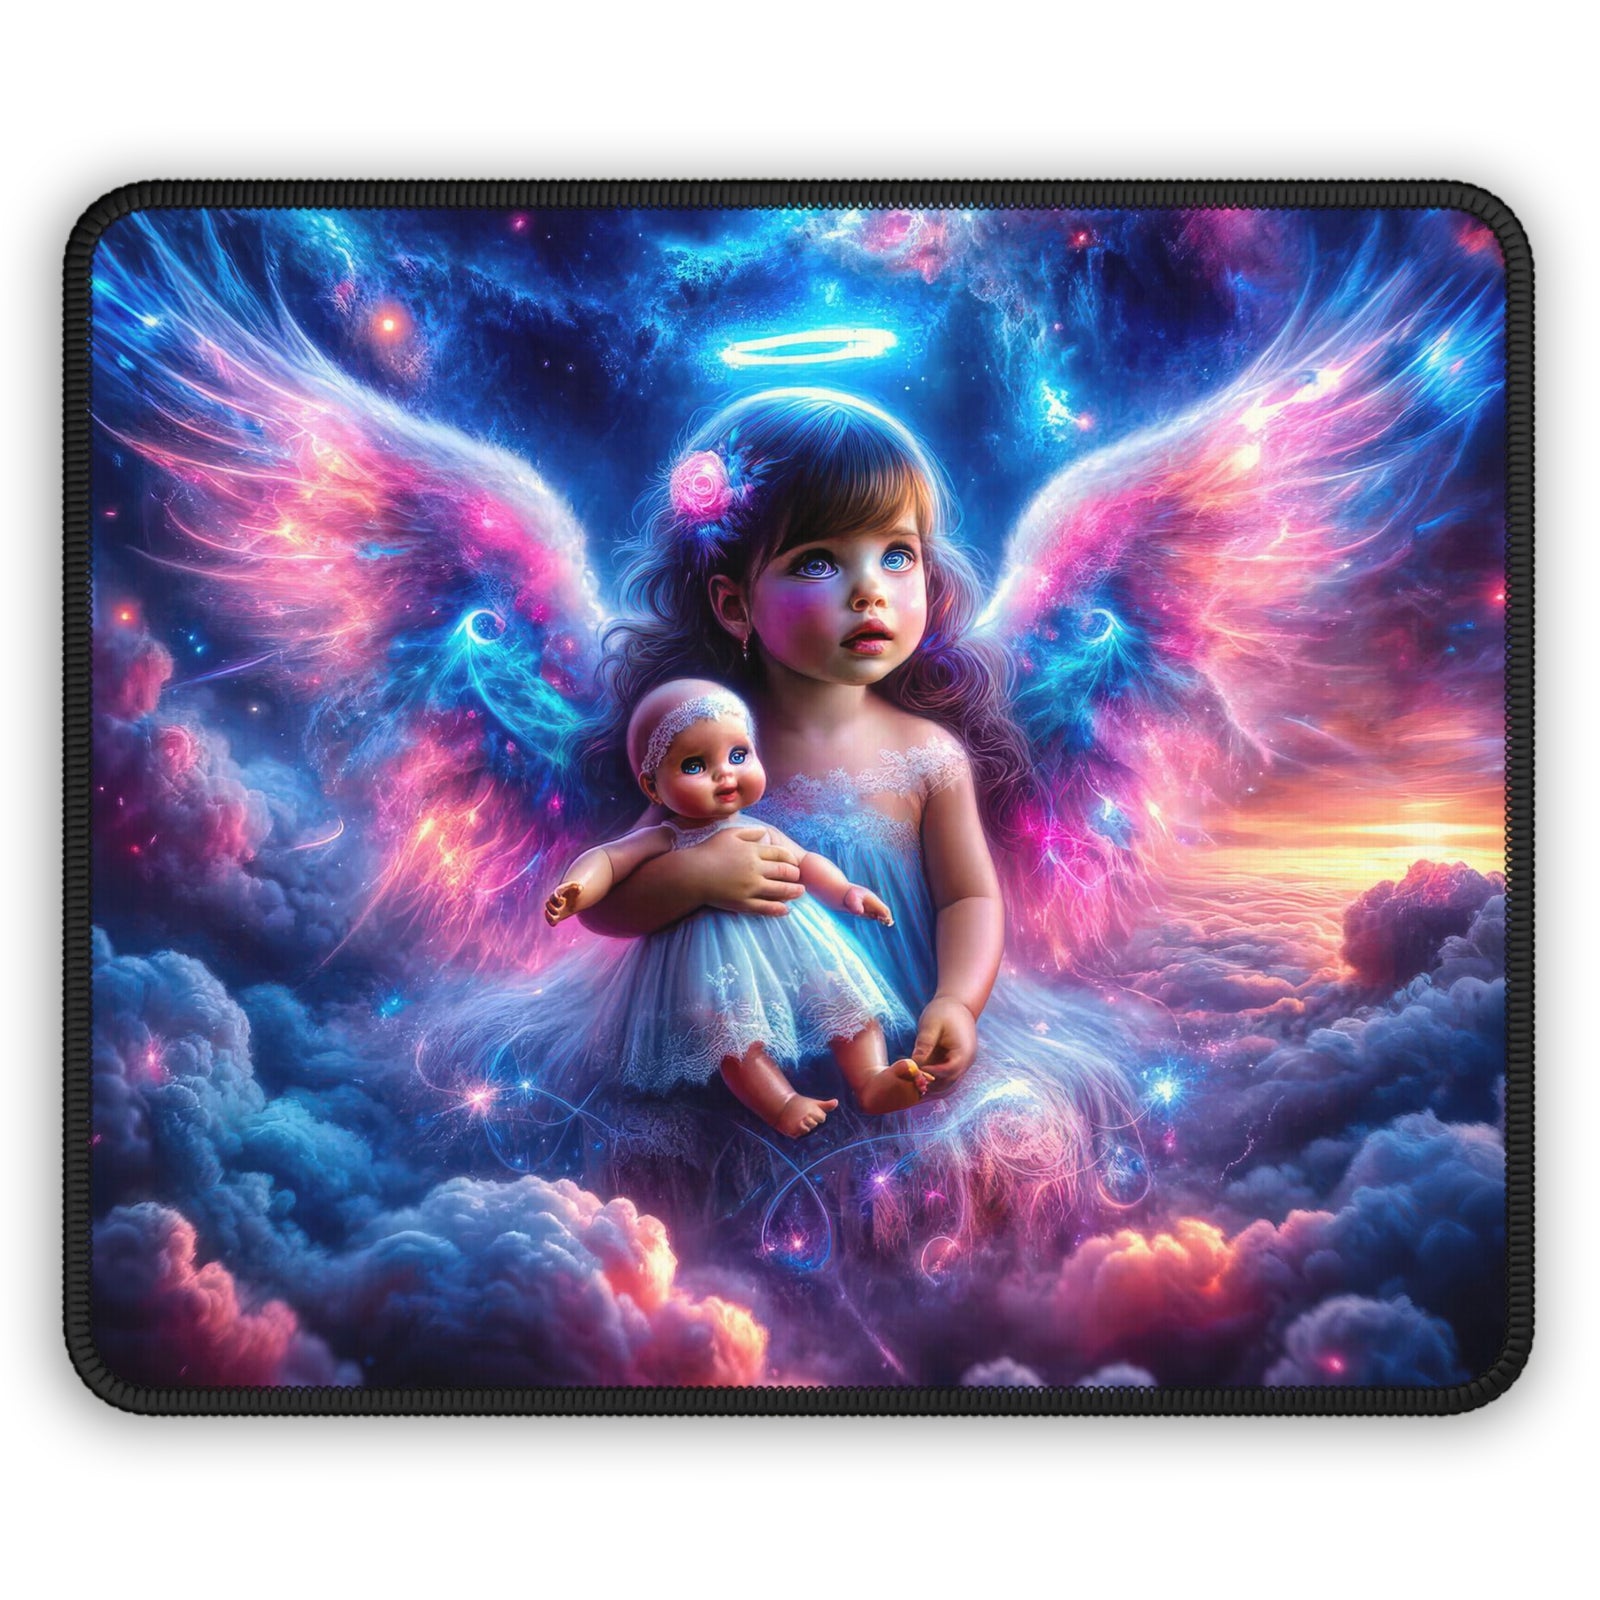 The Celestial Innocence Gaming Mouse Pad